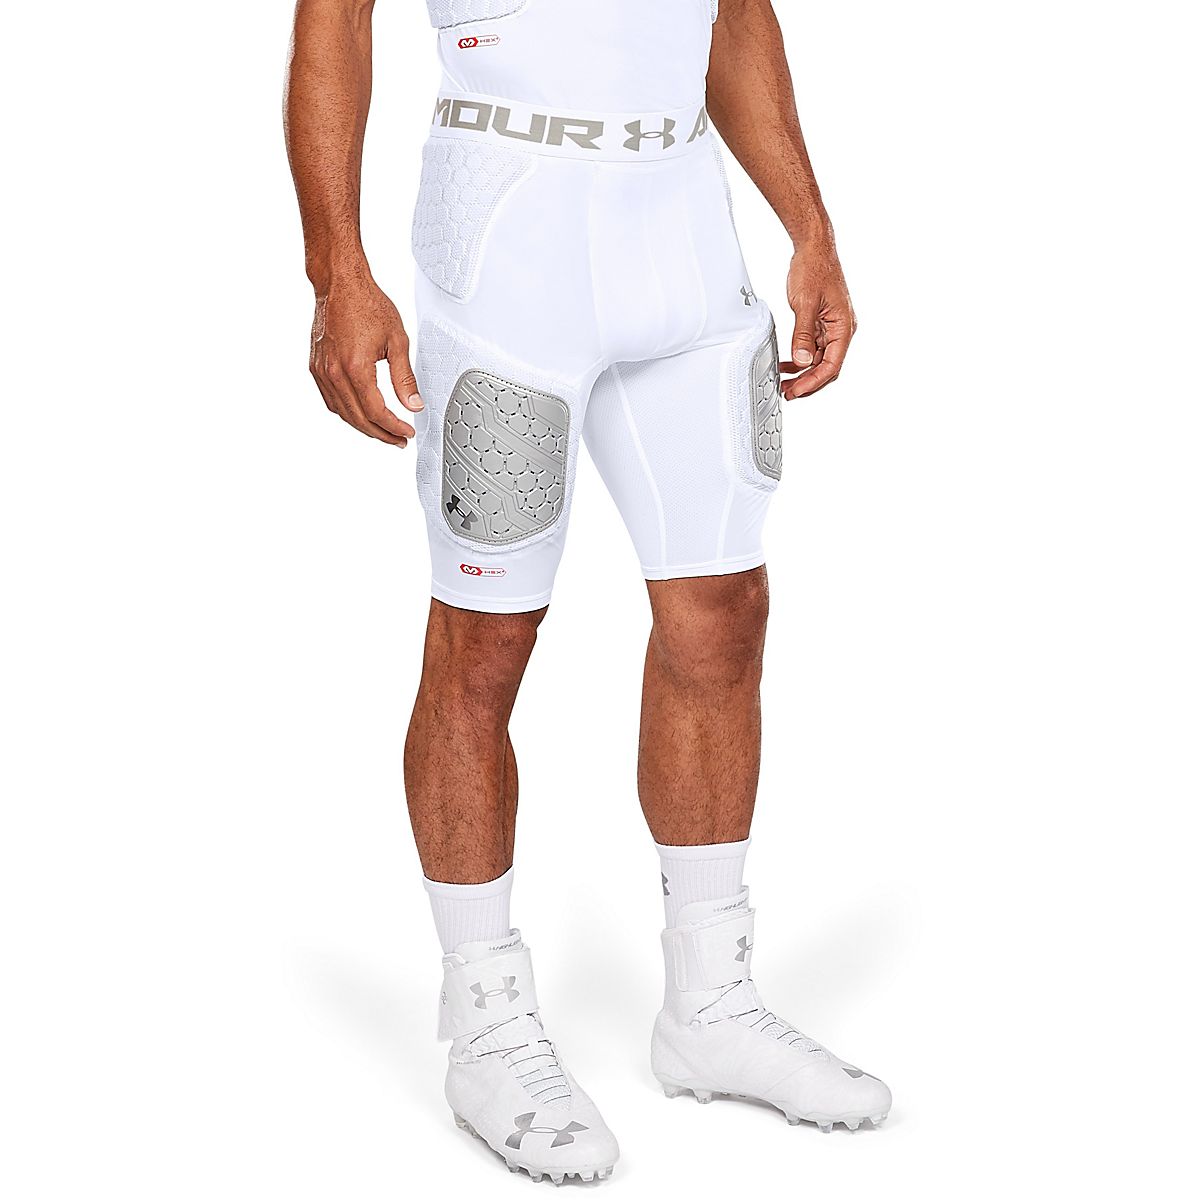 Under Armour Adults' Gameday Armour Pro 5-Pad Girdle | Academy